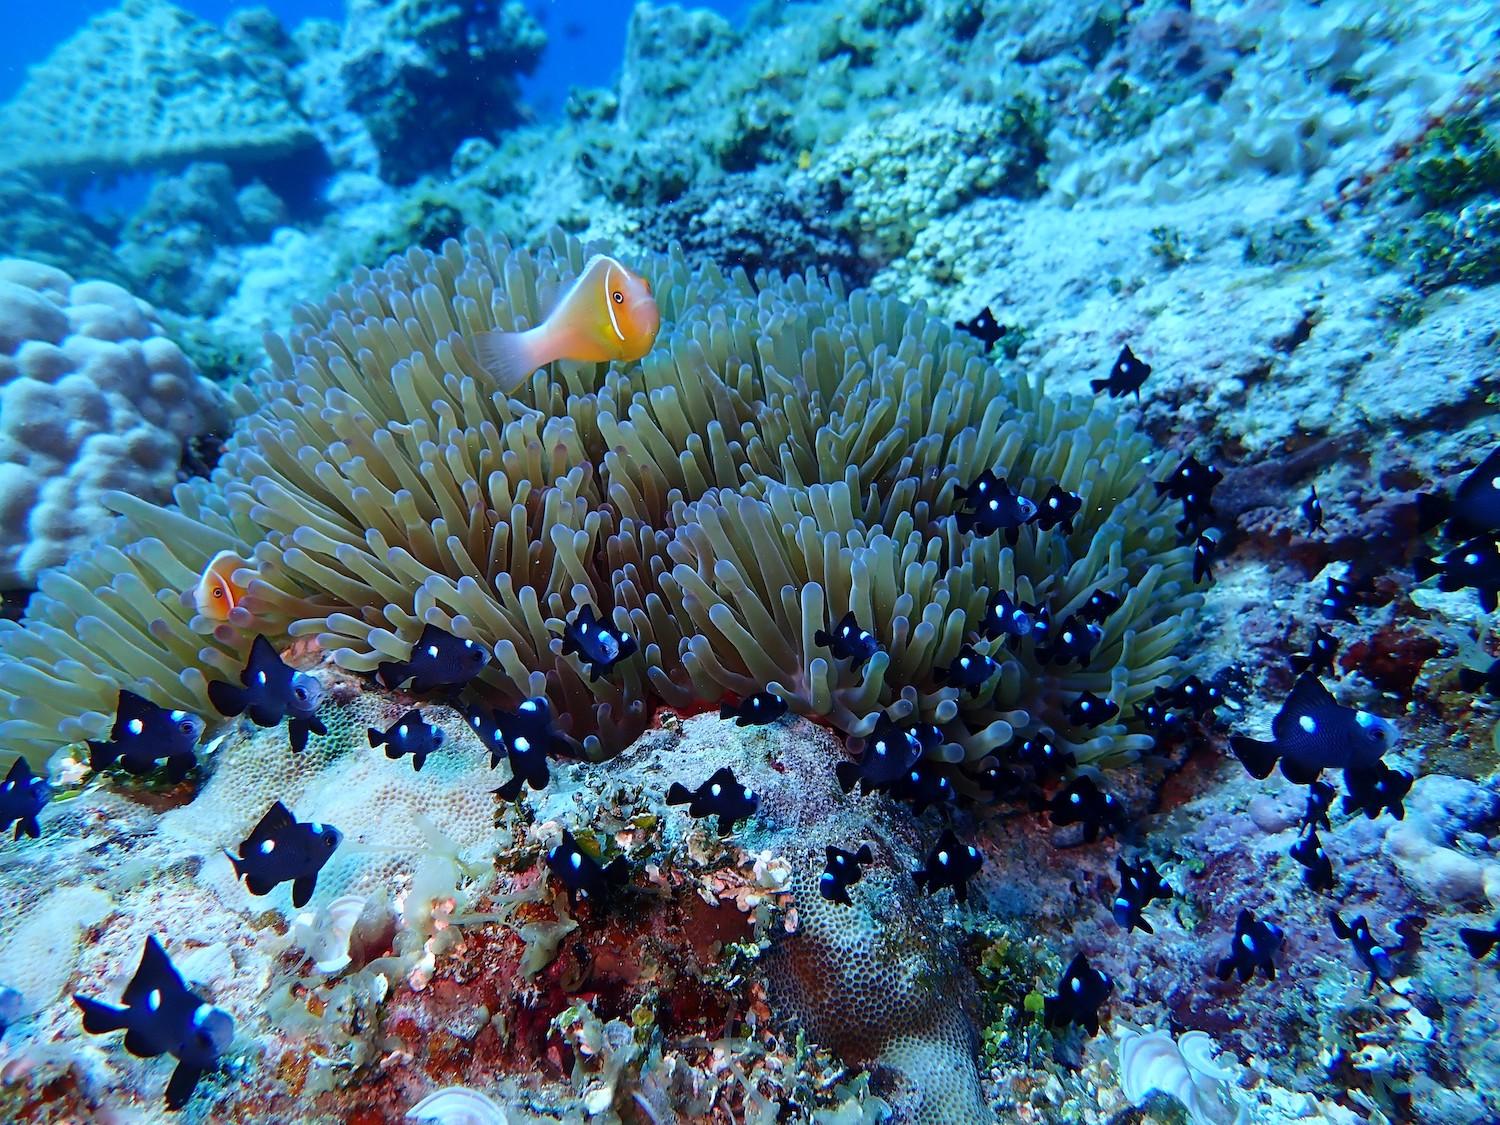 Two clown fish and many threespot damselfish swim around a giant carpet anemone on a coral reef in the Asian marine unit of War in the Pacific National Historical Park, Guam/NPS